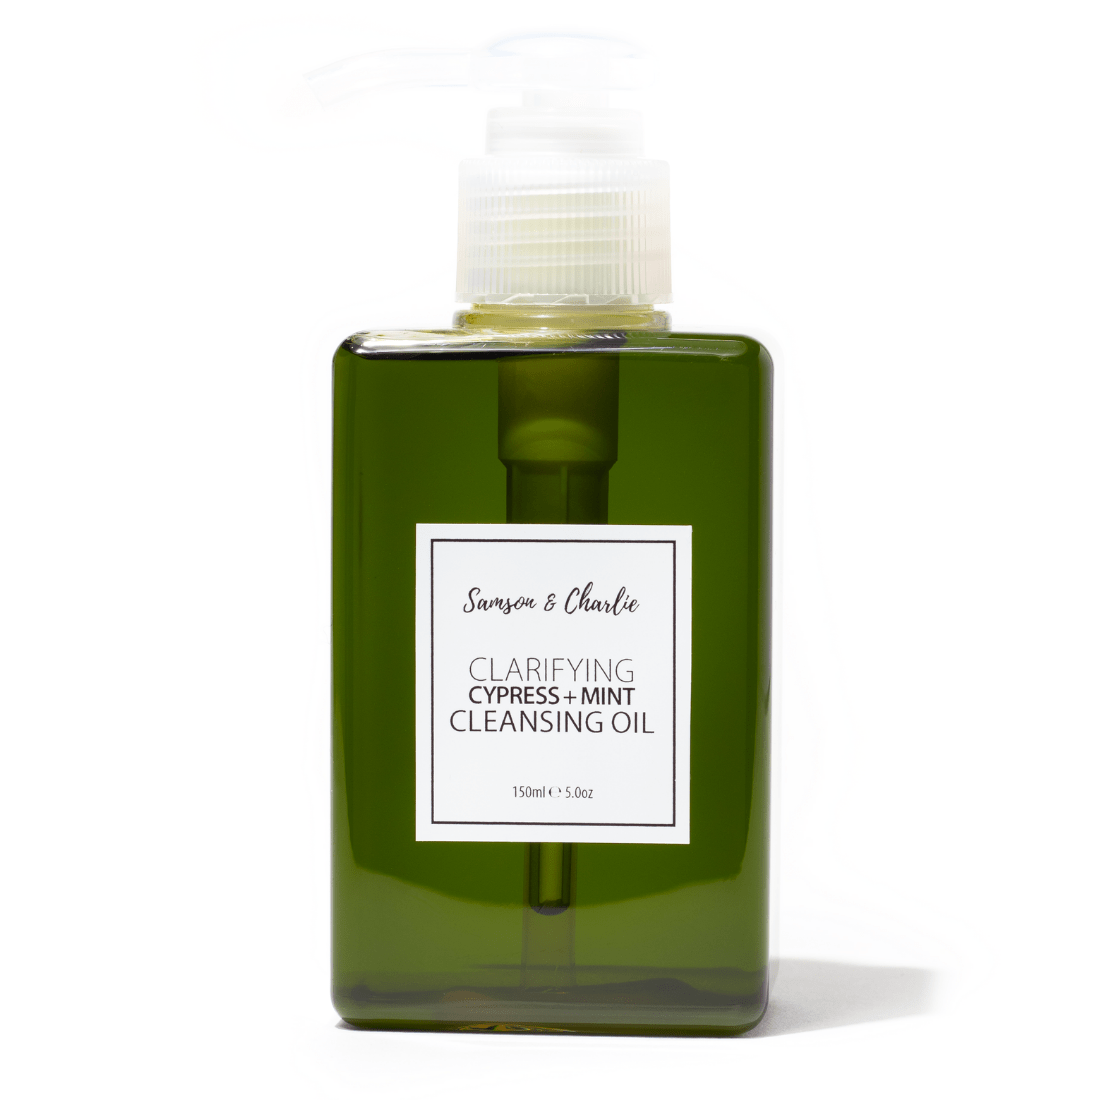 Samson & Charlie Cleansing Oil 150ml Clarifying Cypress + Mint  Cleansing Oil